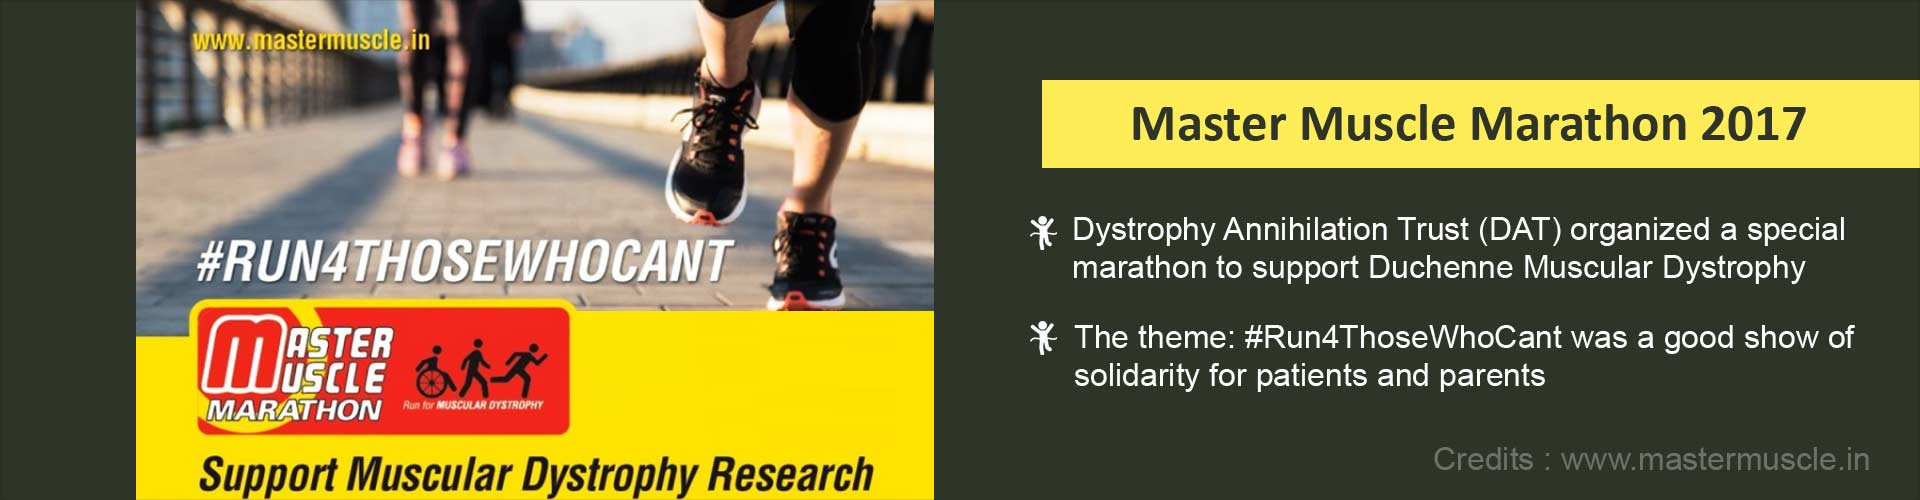 Master Muscle Marathon 2017
- Dystrophy Annihilation Trust (DAT) organized a special marathon to support Duchenne Muscular Dystrophy
- The theme: #Run4ThoseWhoCant was good show of solidarity for patients and parents.